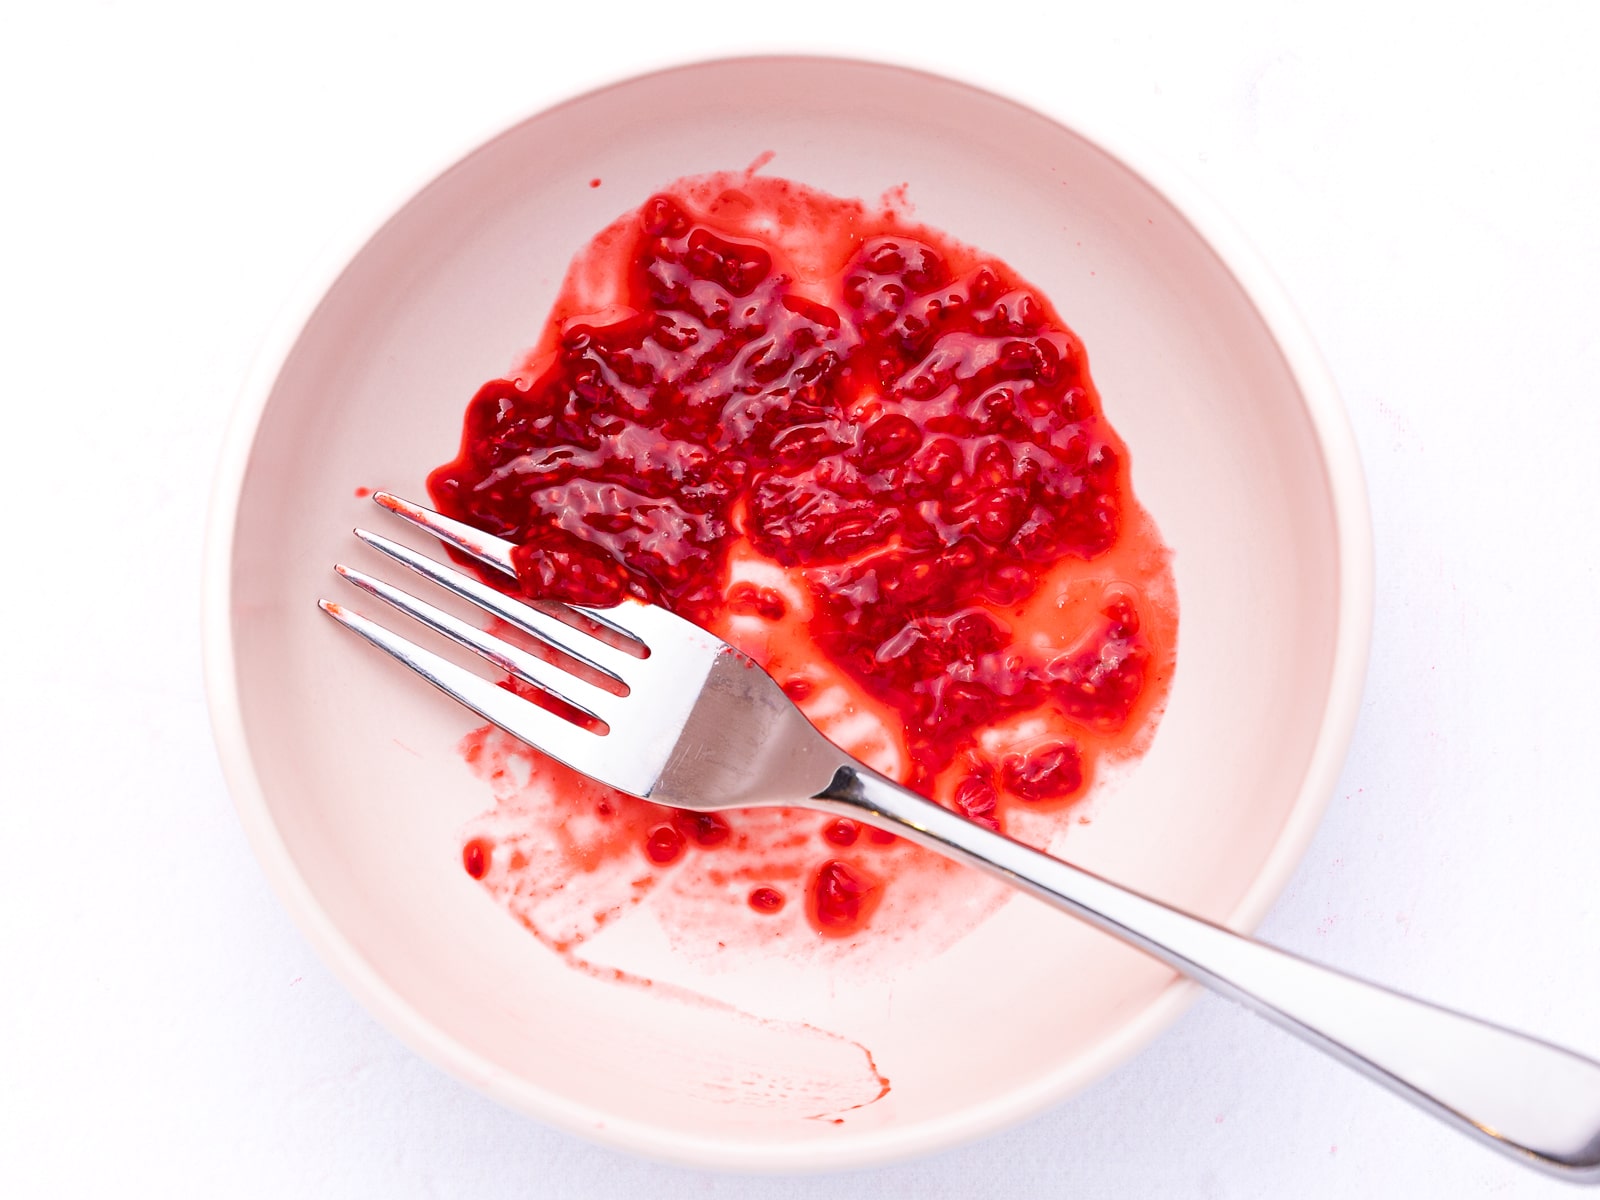 fork smushed raspberries in a small bowl